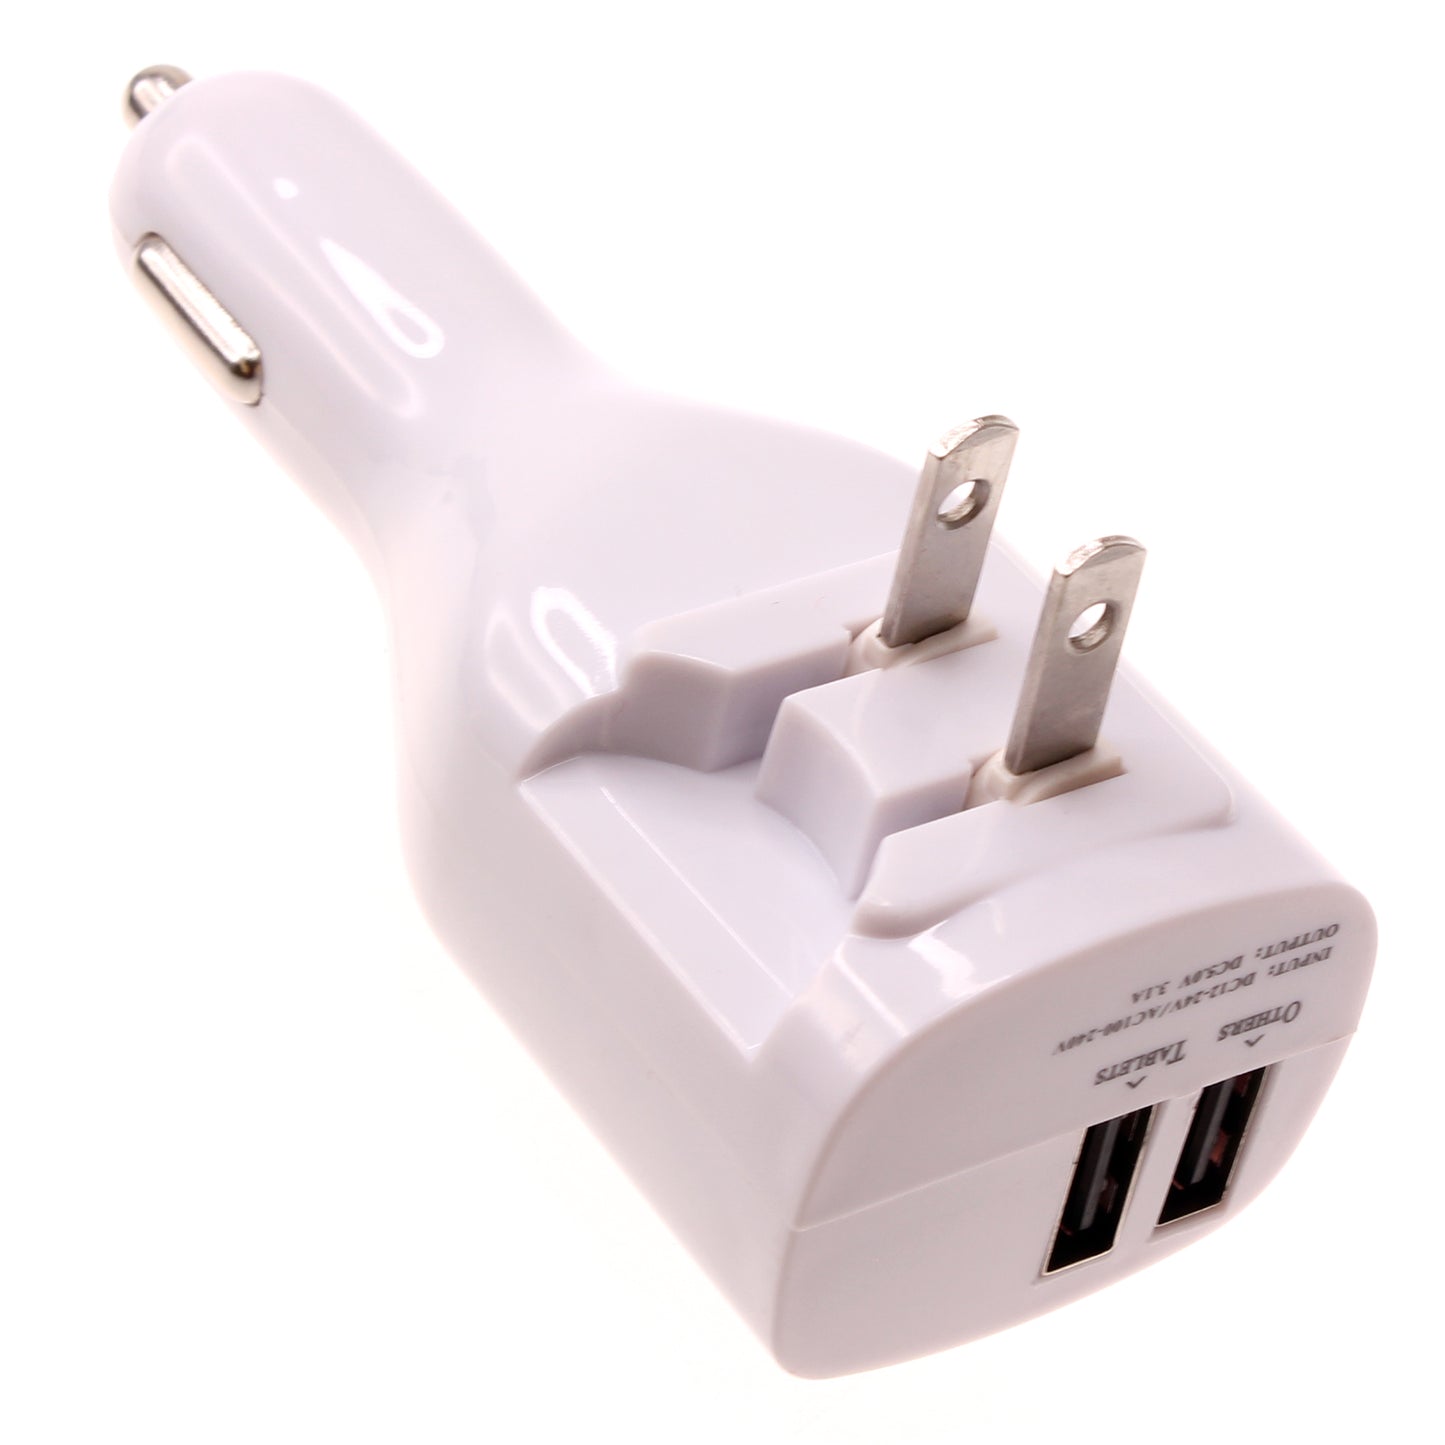 2-in-1 Car Home Charger 6ft Long USB Cable Power Cord Travel Adapter Charging Wire Folding Prongs - ONY13